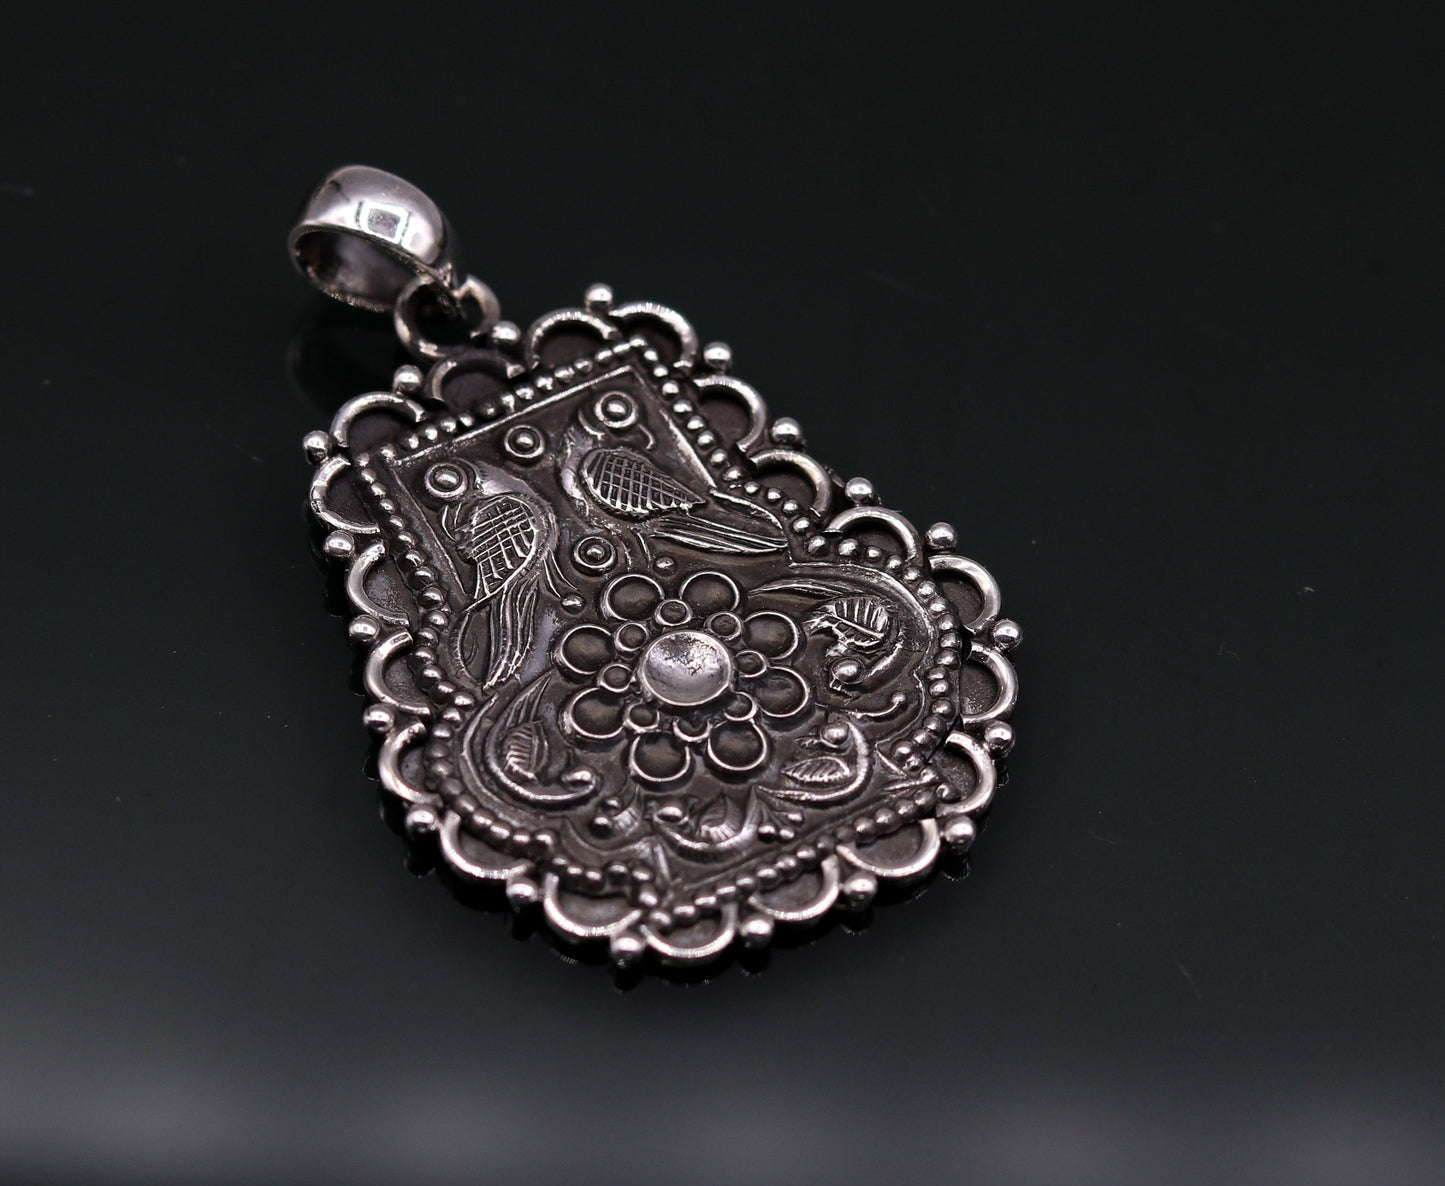 Vintage antique design handmade 925 sterling silver amazing design tribal temple jewelry belly dance jewelry  pendant necklace nsp199 - TRIBAL ORNAMENTS